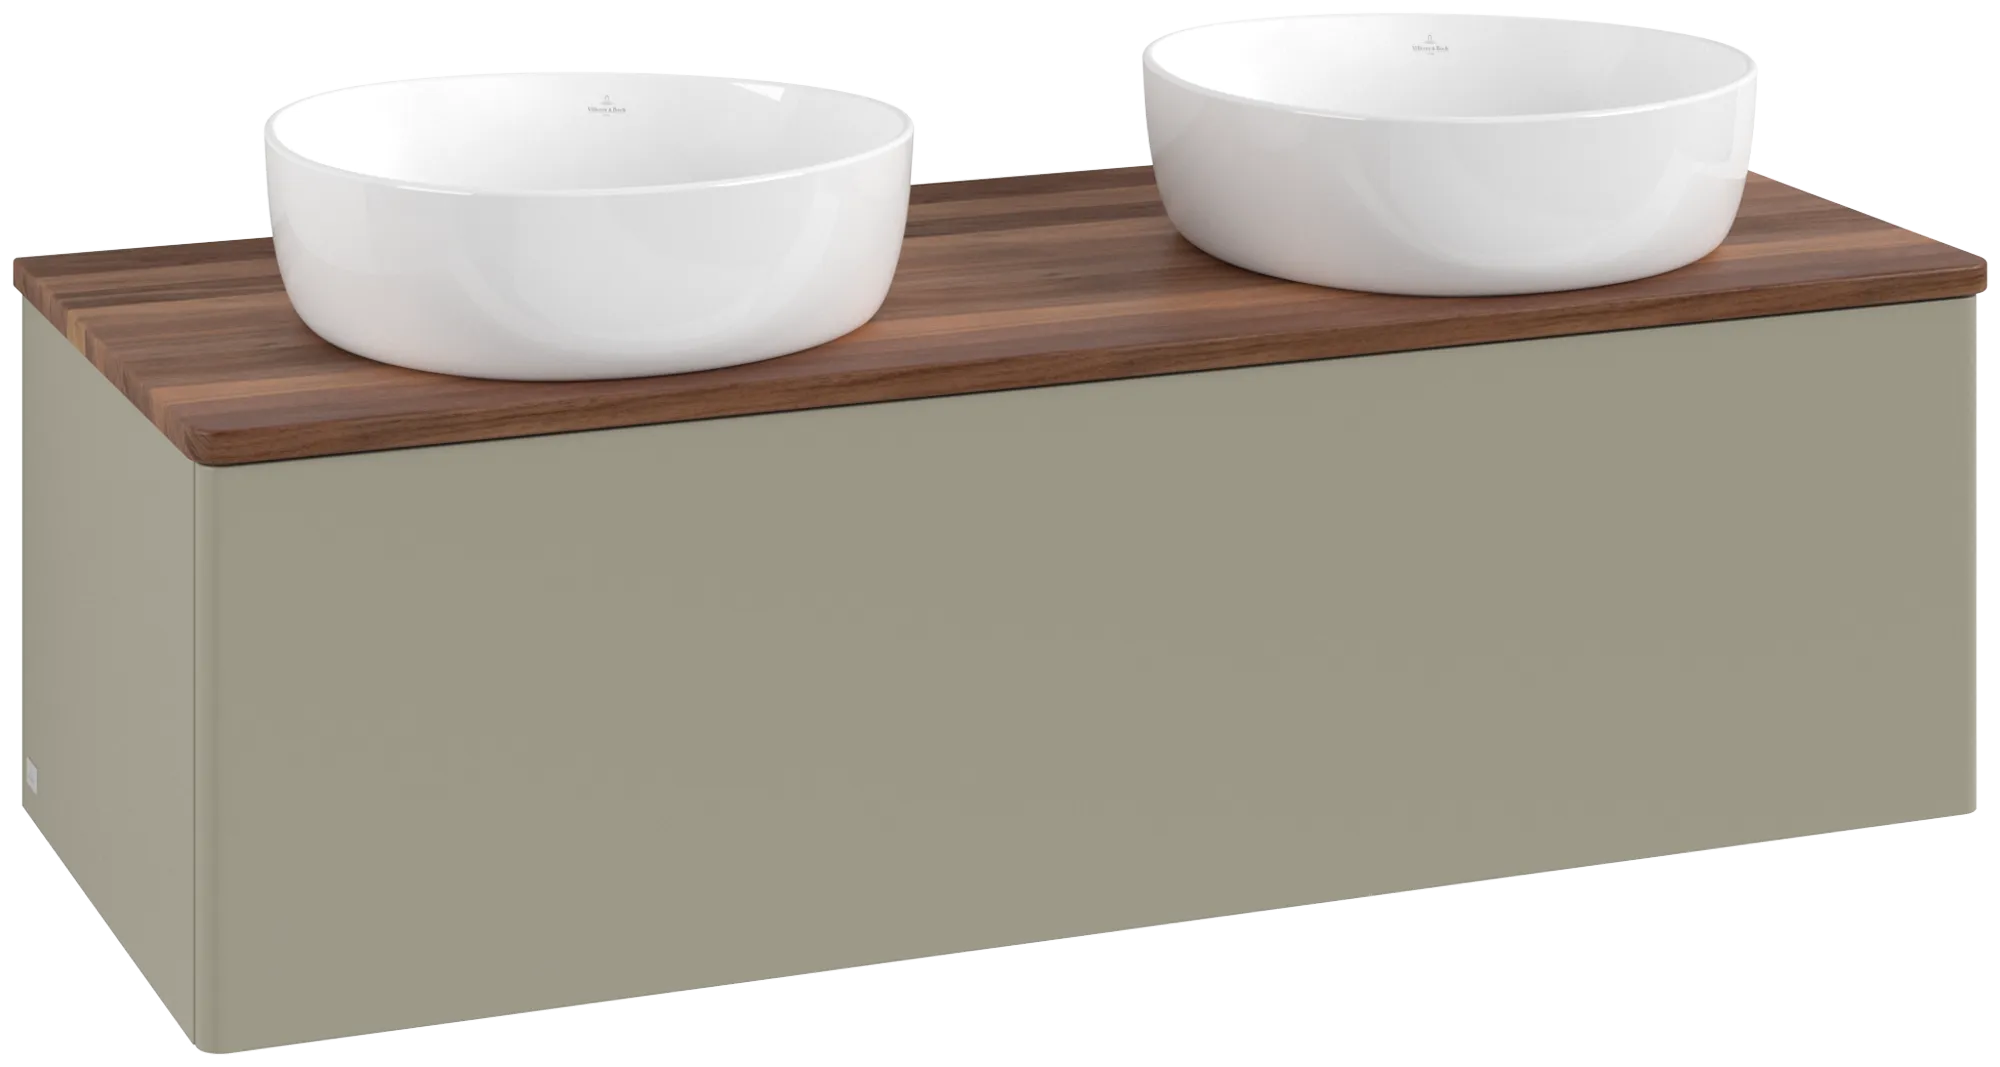 VILLEROY BOCH Antao Vanity unit, with lighting, 1 pull-out compartment, 1200 x 360 x 500 mm, Front without structure, Stone Grey Matt Lacquer / Warm Walnut #L35012HK resmi